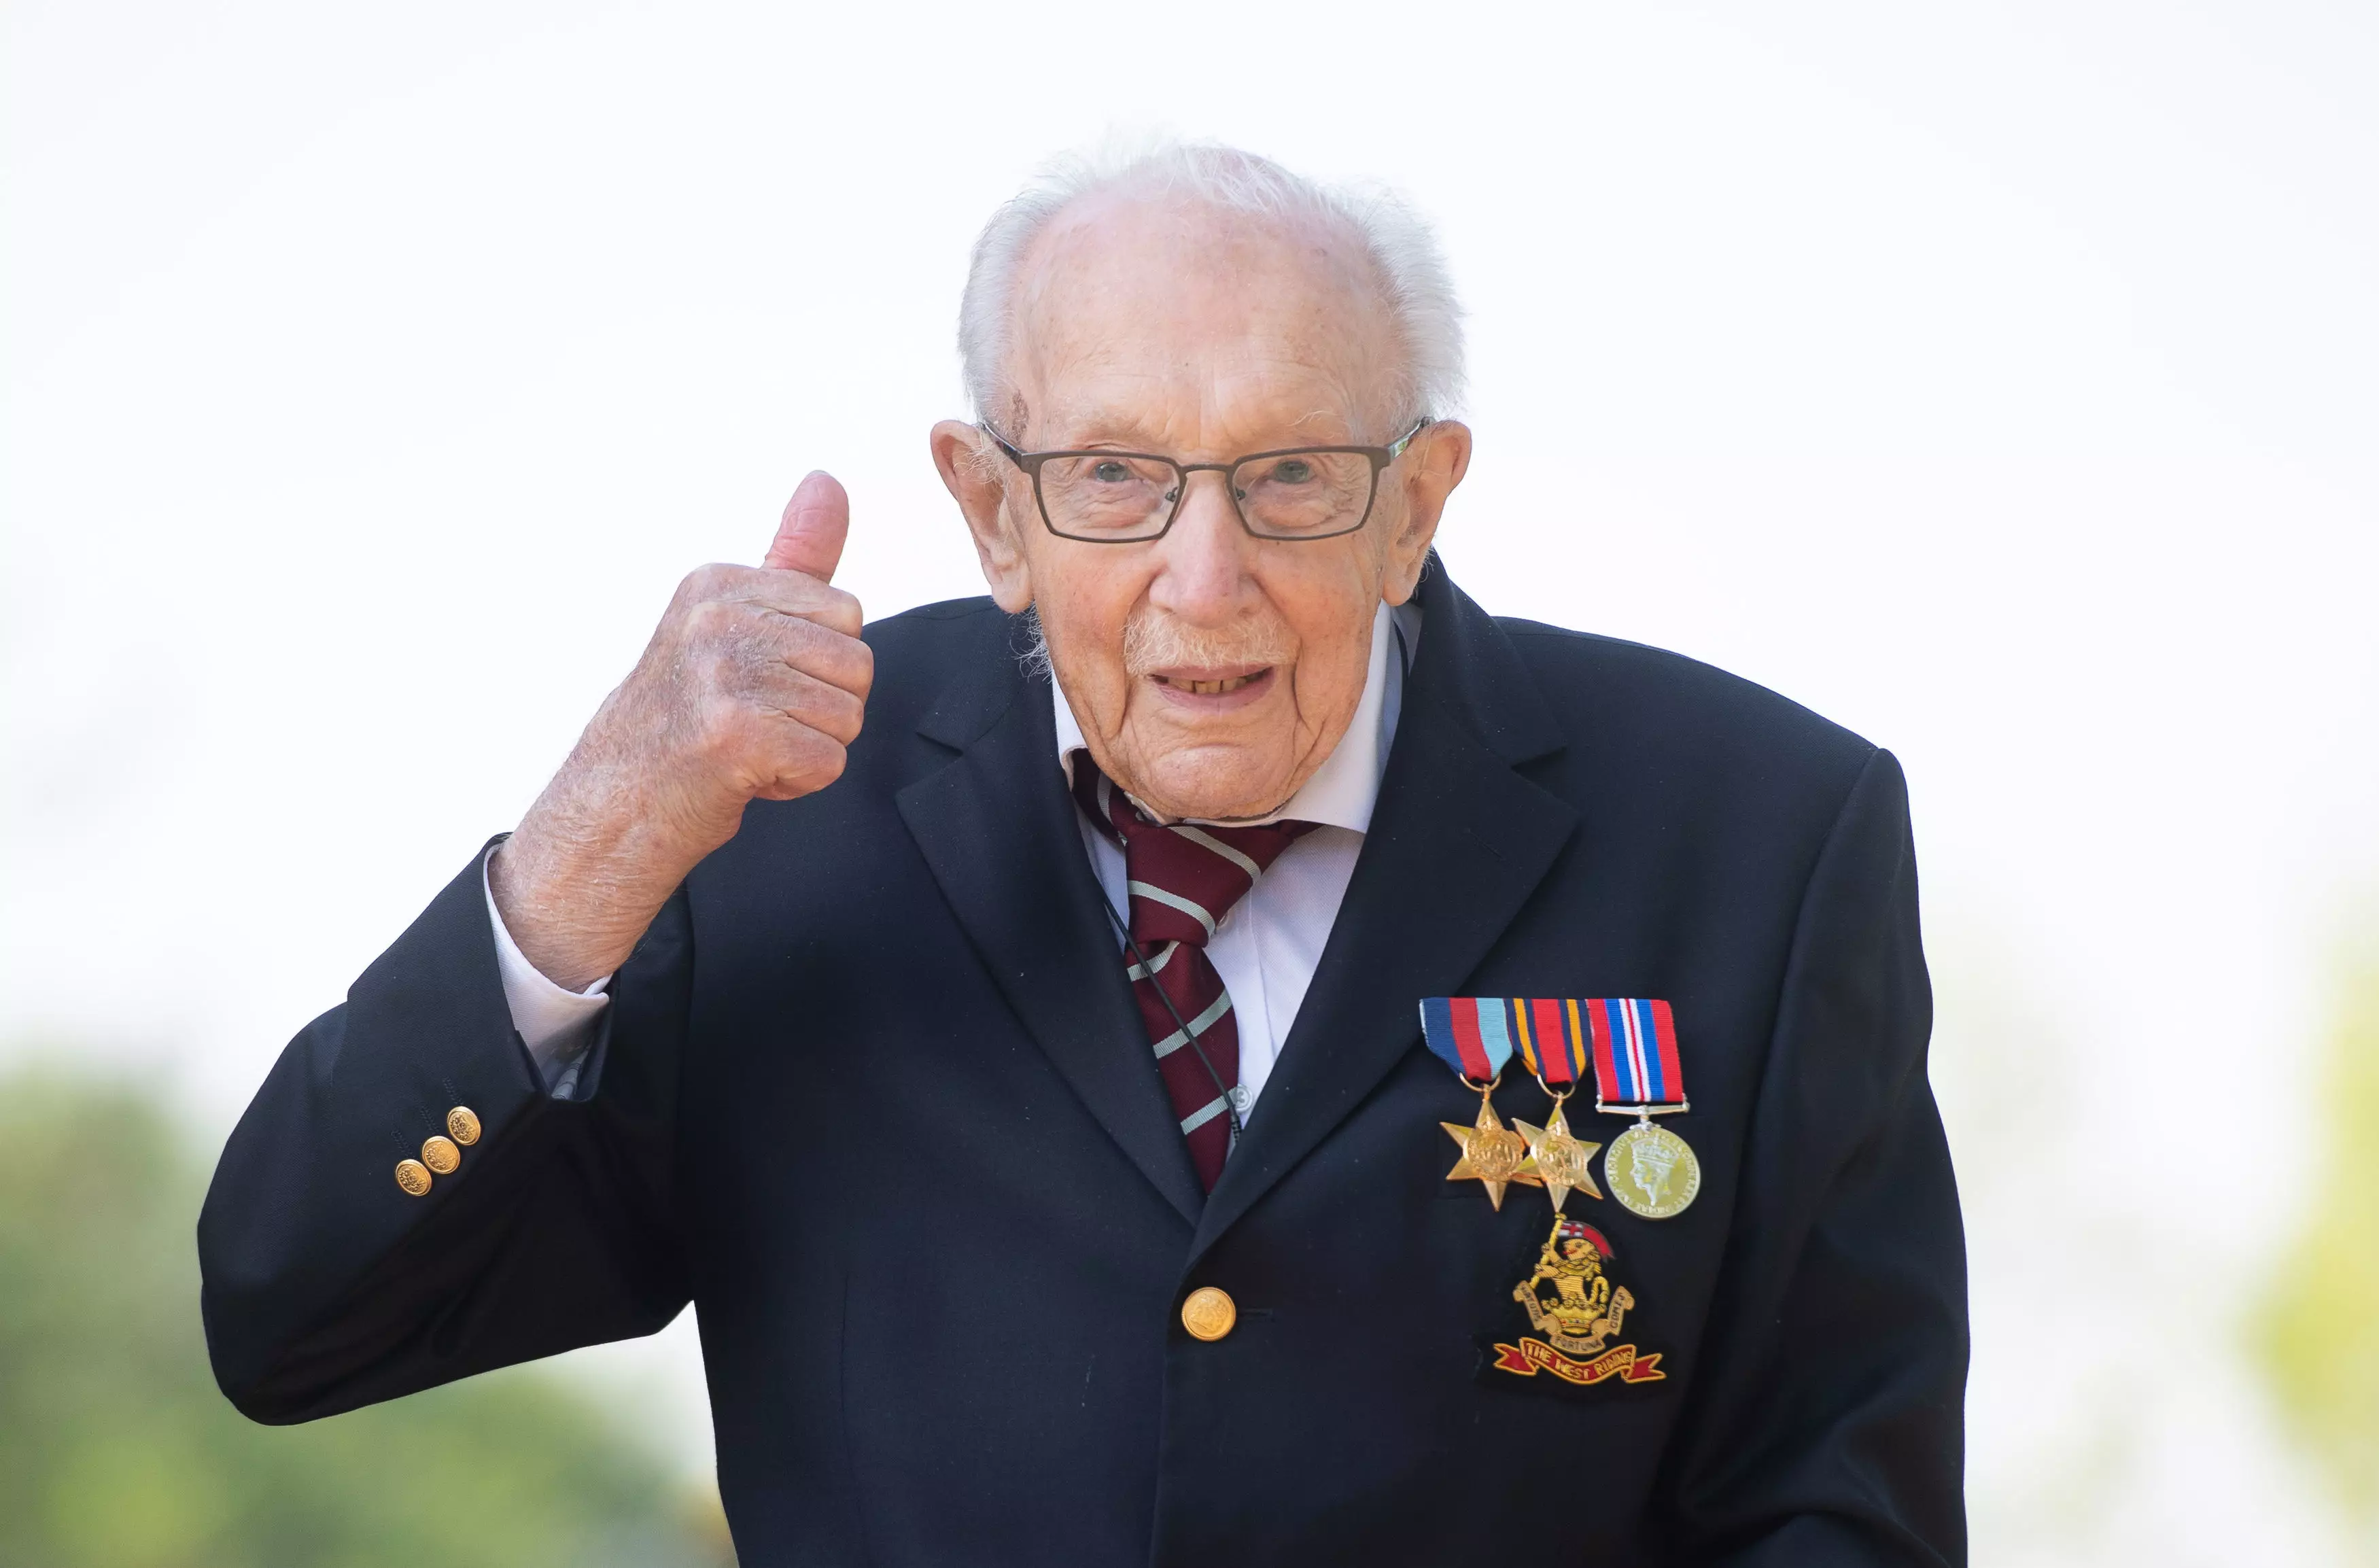 Captain Sir Tom Moore raised £32.8m for the NHS.